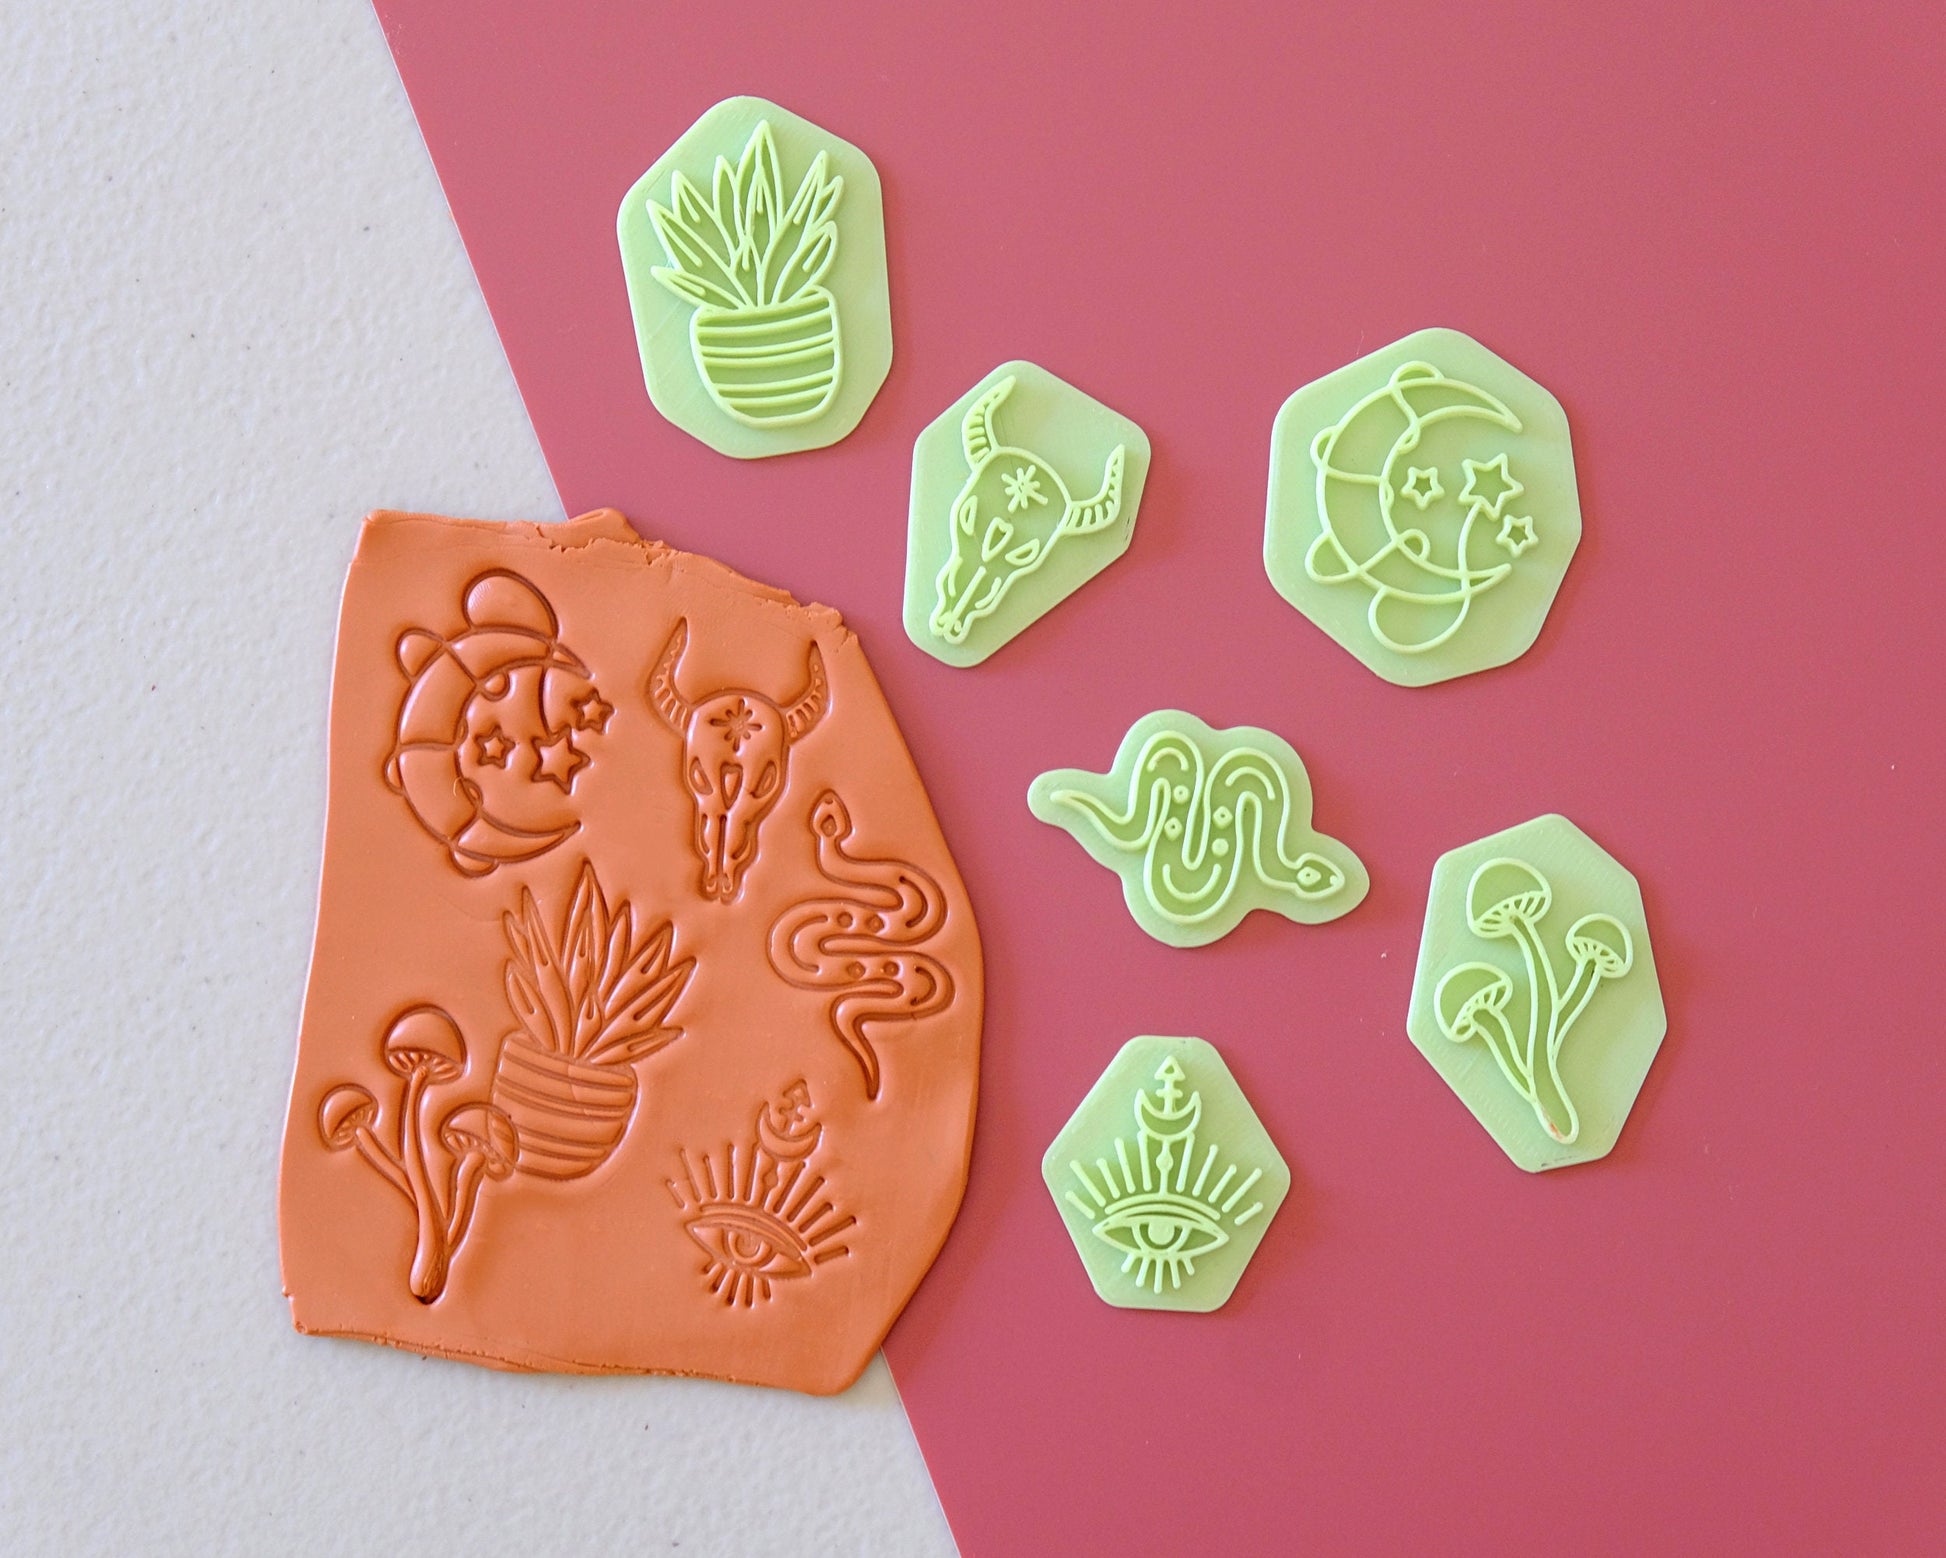 Boho Polymer Clay Stamps, Clay Embossing Stamps